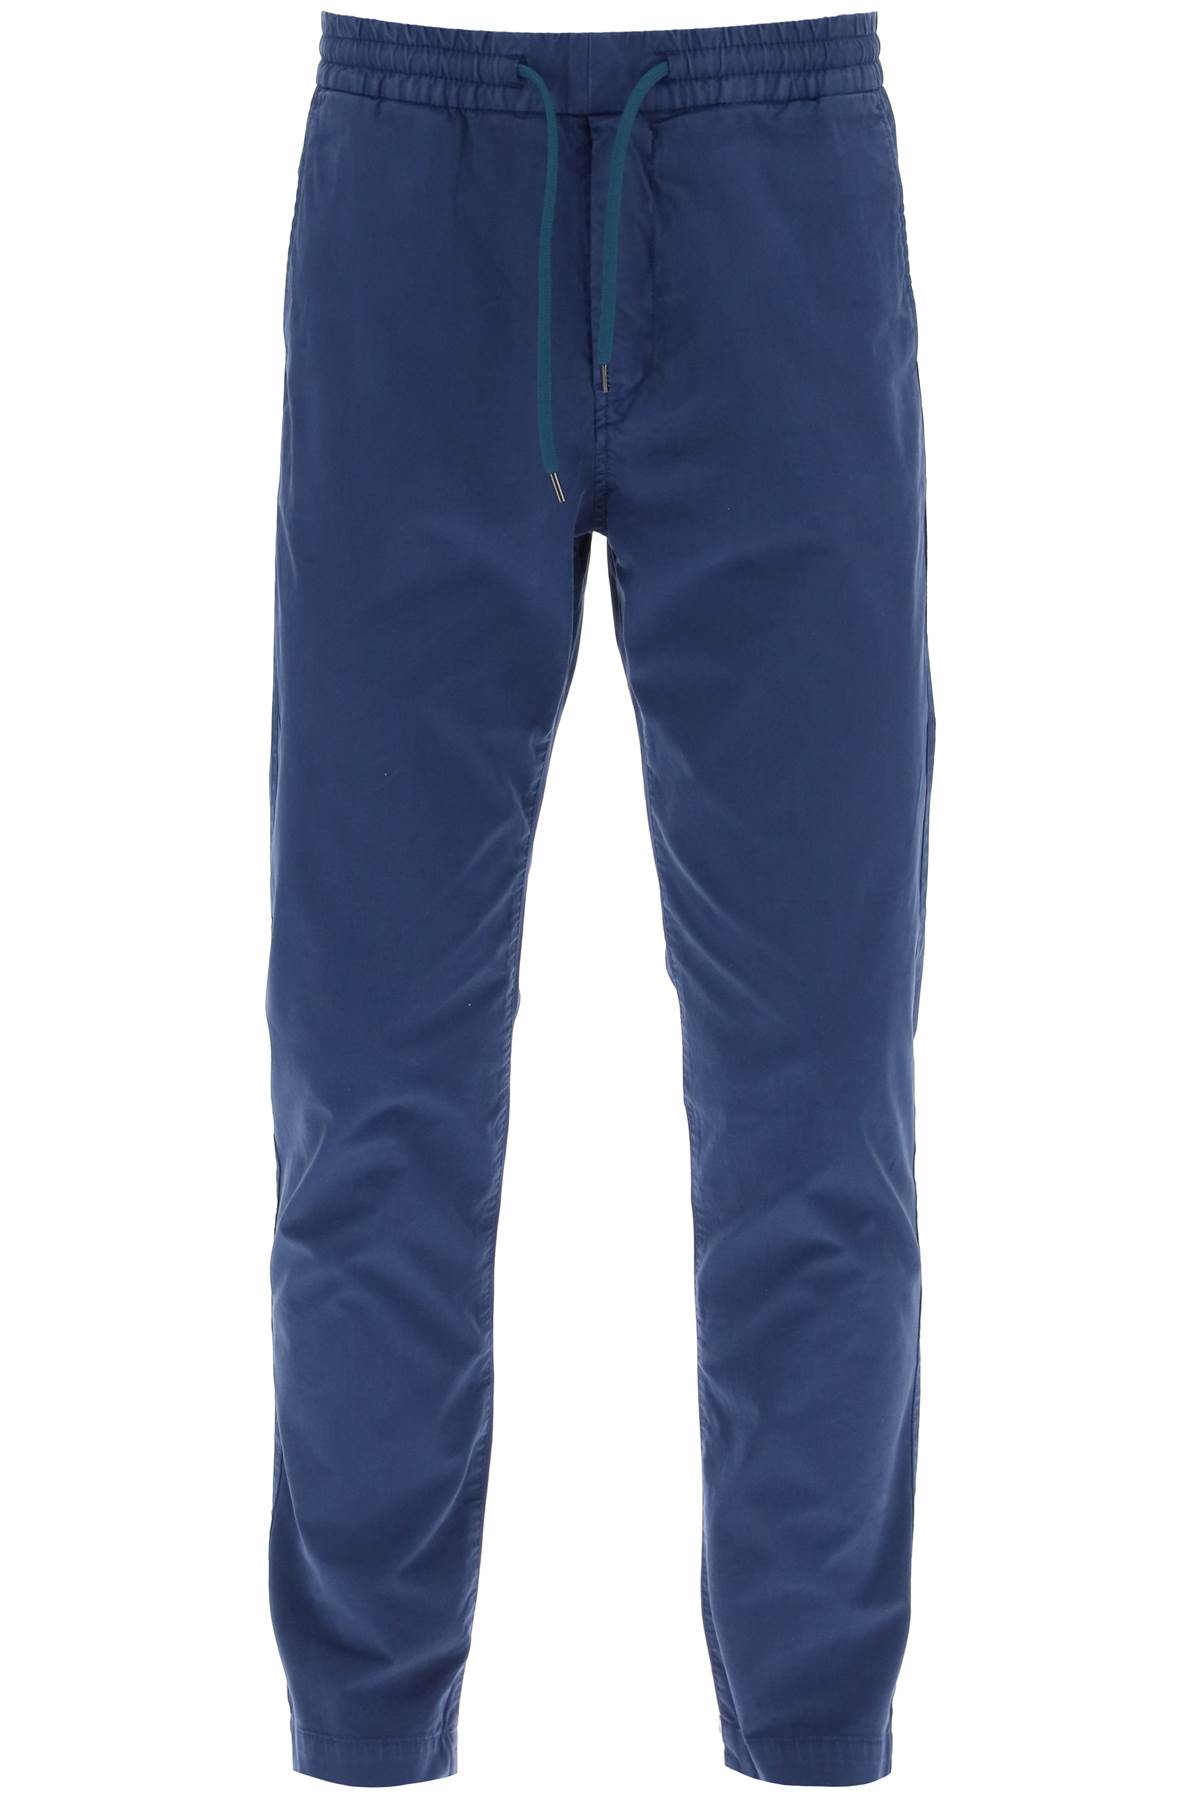 PS BY PAUL SMITH trousers WITH ELASTICATED WAIST